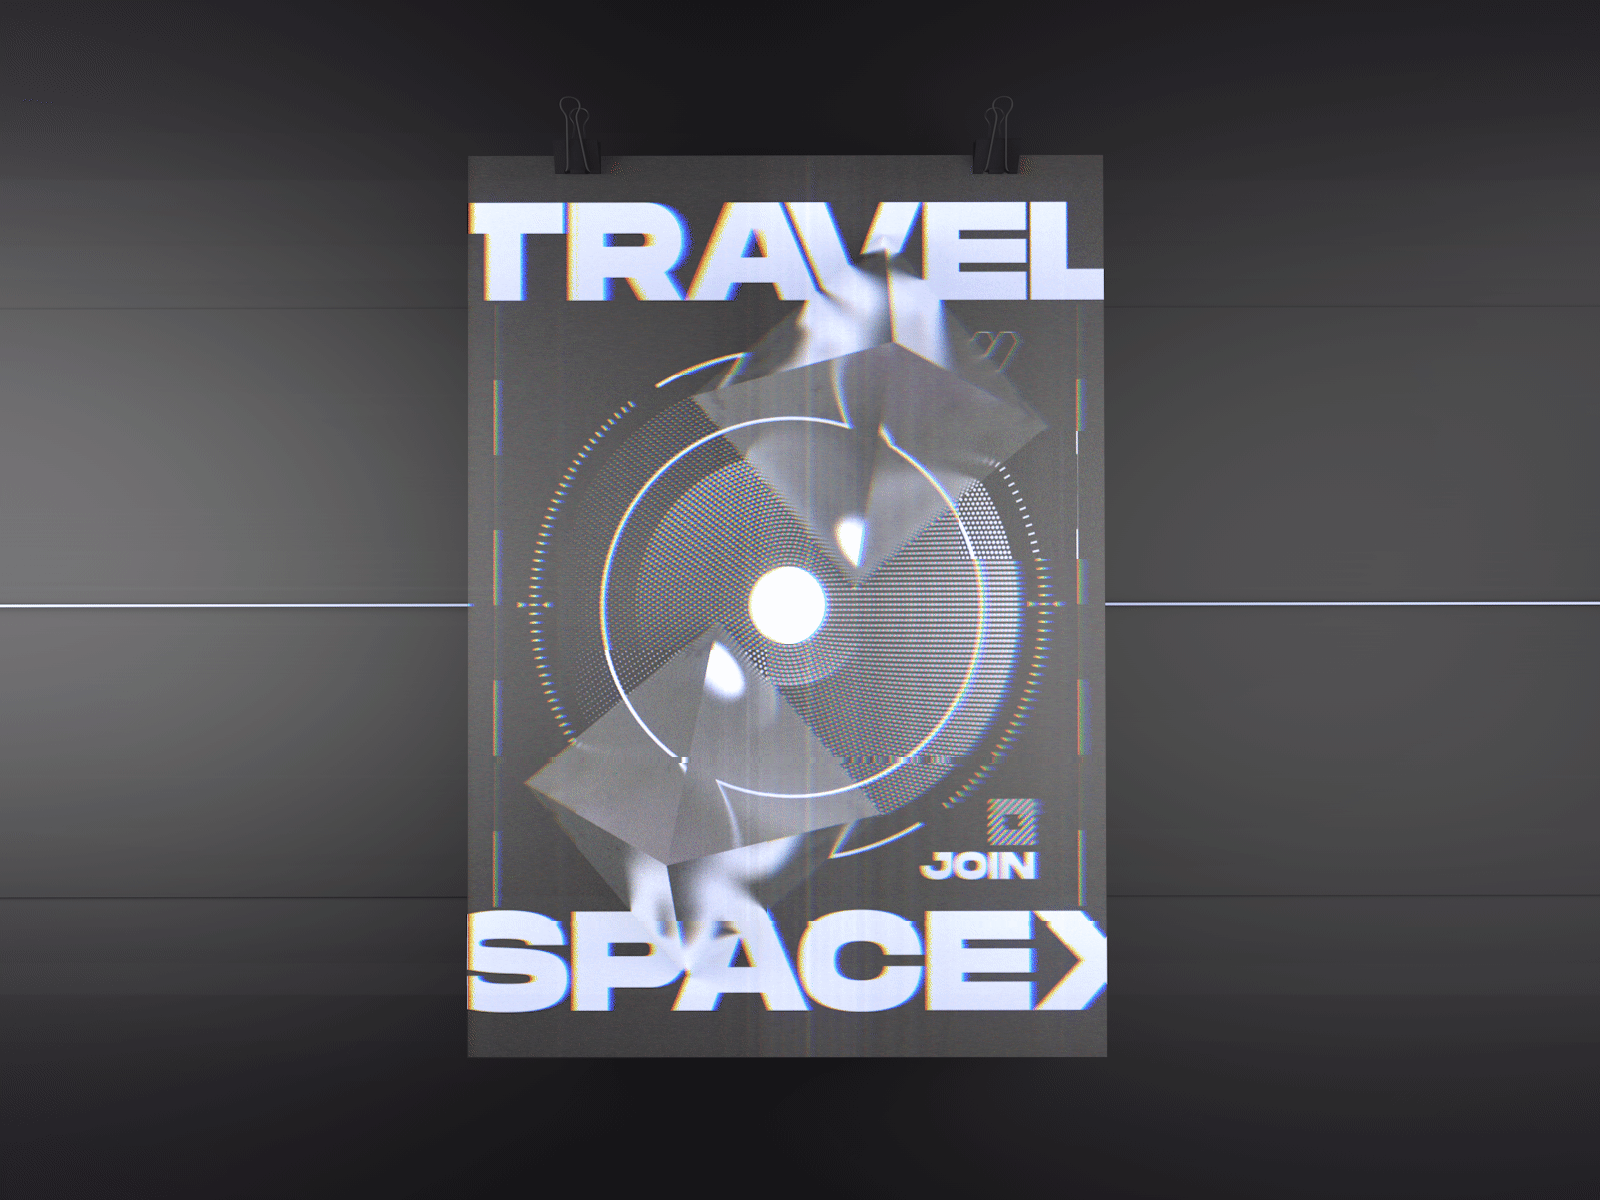 Join Spacex 3d animation artwork bestofdribbble dribbblecreations dribbblehangtime dribbbleinspiration dribbblepopular dribbbleshot dribbbleweeklywarmup futuristic inspiraton motion graphics poster scifi shotdribbble spacex travel